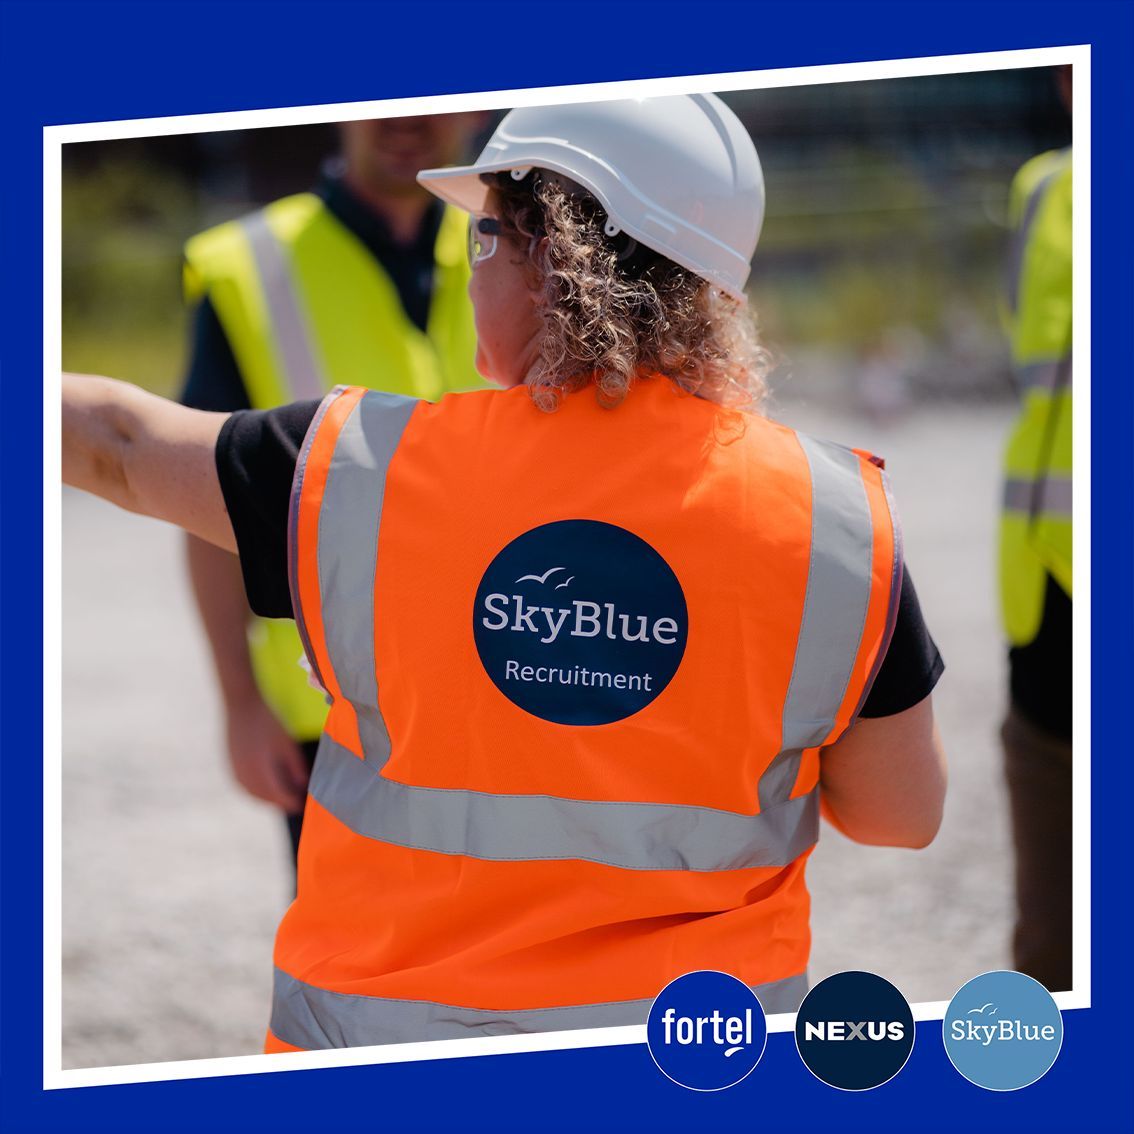 At #Fortel we're committed to cultivating a #safetyculture through rigorous practices, including:

👷‍♂️ Health and safety training
🛑 #Riskassessment and incident prevention
🗣️ Open communication
😷 Proper safety equipment and gear
🚨 Reporting and investigation of any near misses